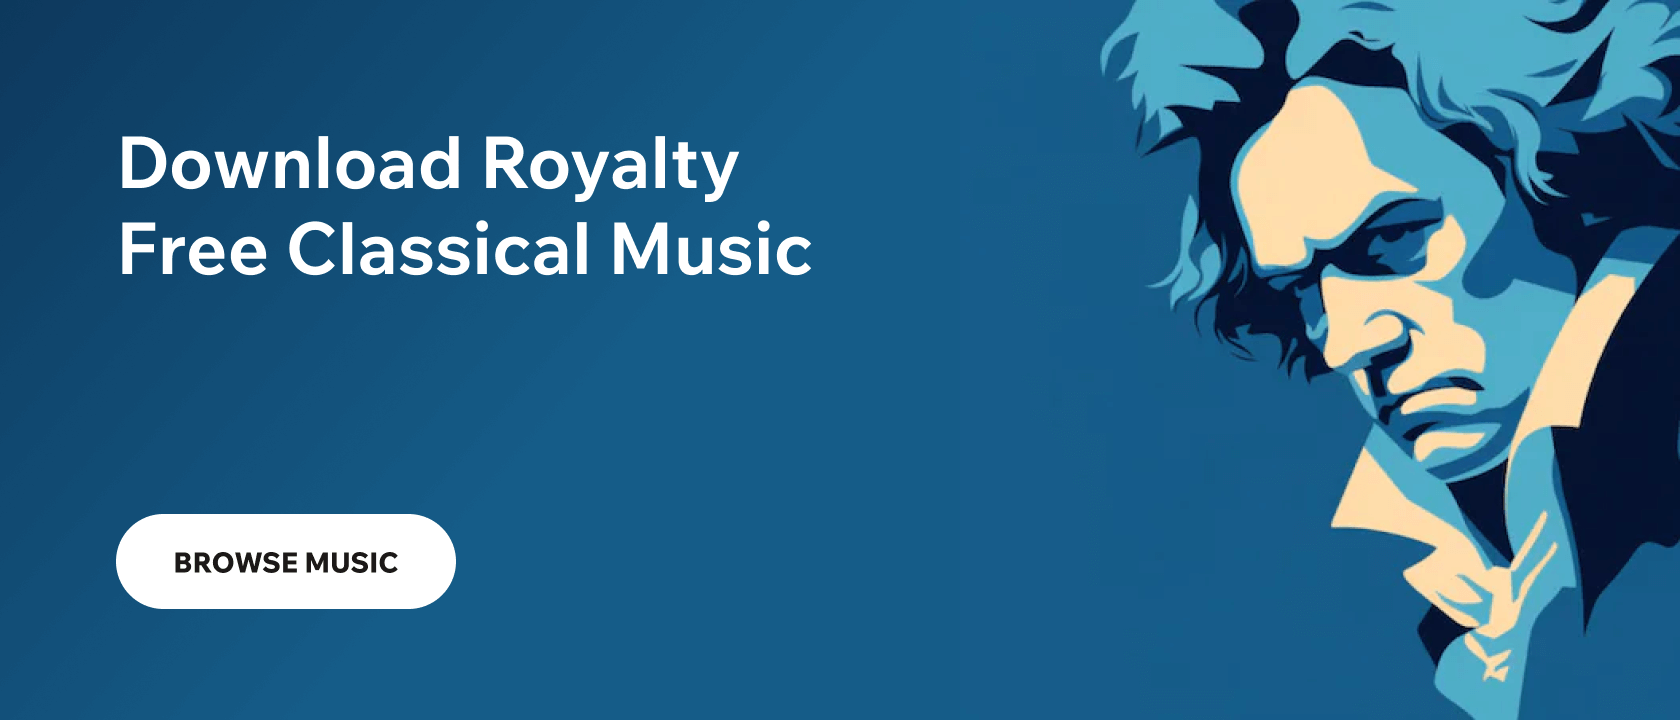 Is Classical Music Royalty Free?